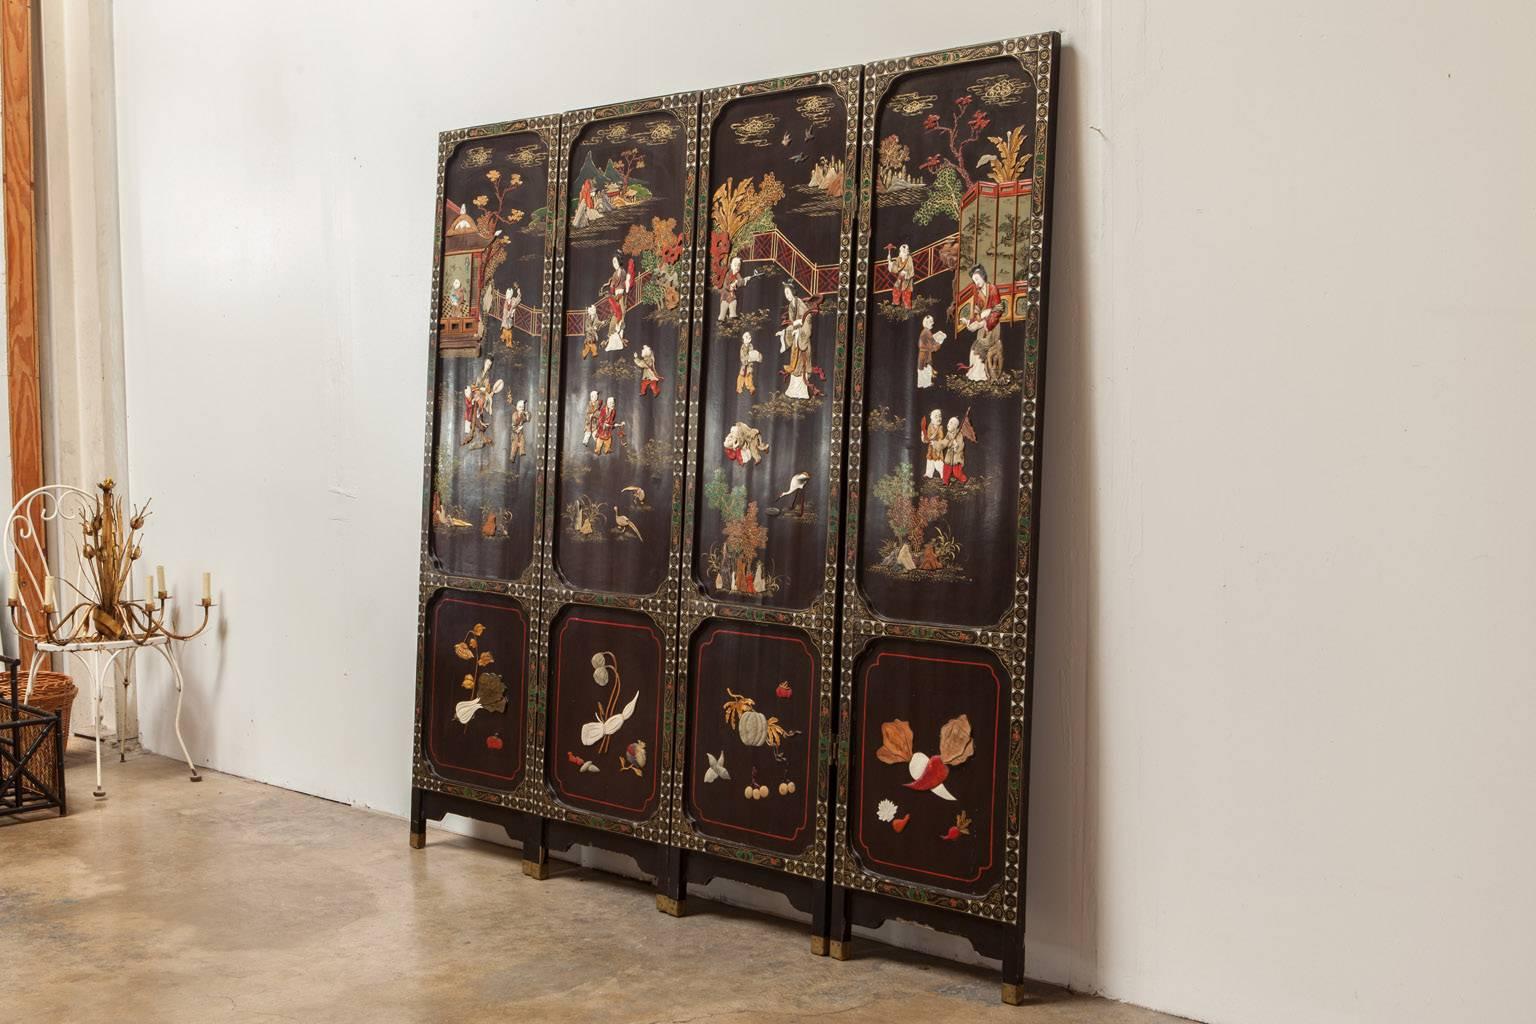 Intricate Chinese four panel Coromandel style screen featuring idyllic scenes made of hand-carved inlay. Decorated with hard stones, coral, jade, bone, and mother-of-pearl on a black lacquer ground with gilt borders and red lacquer highlights. The